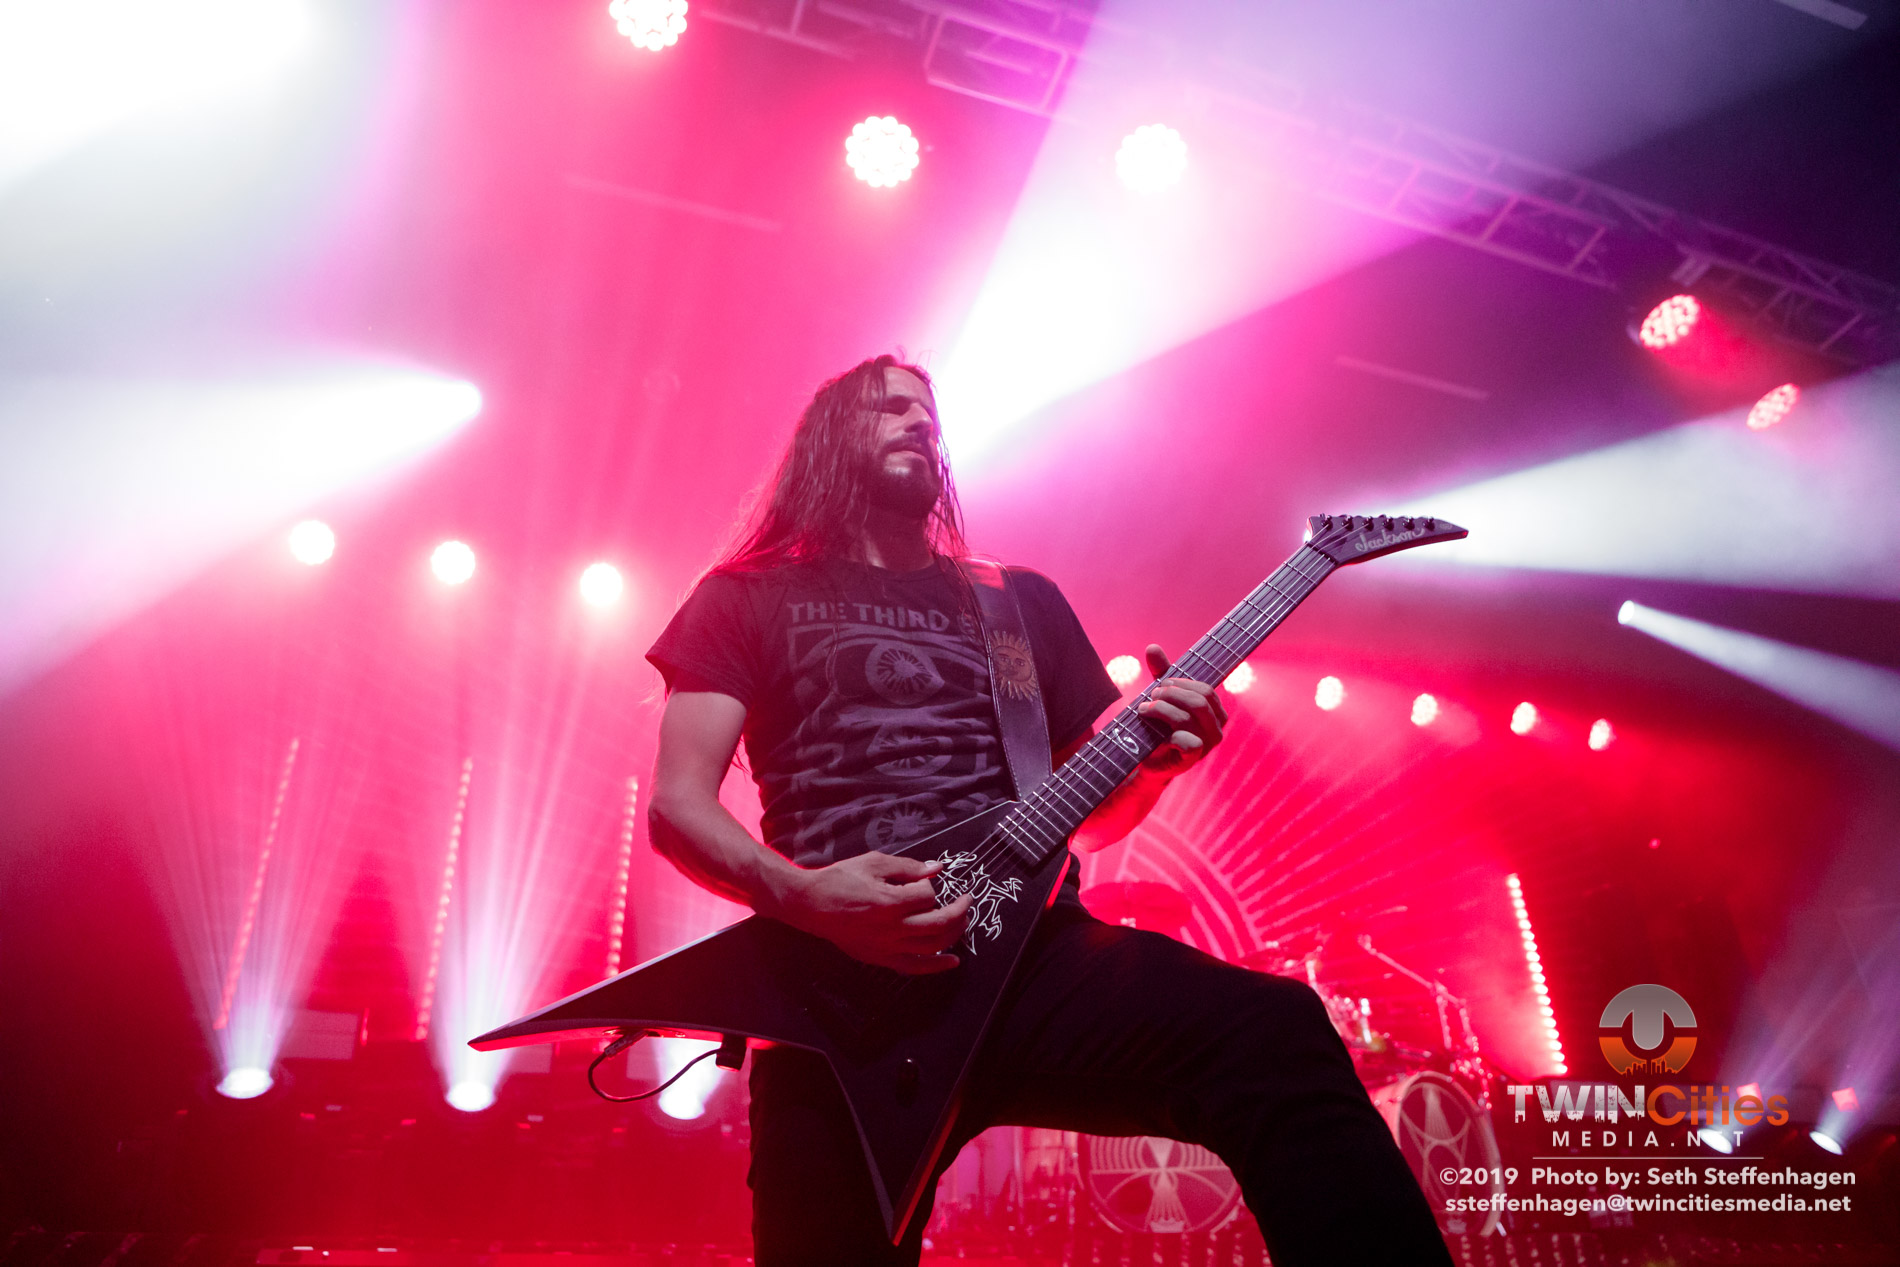 August 9, 2019 - Minneapolis, Minnesota, United States - Gojira live in concert at First Avenue along with Witchden as the openers.

(Photo by Seth Steffenhagen/Steffenhagen Photography)